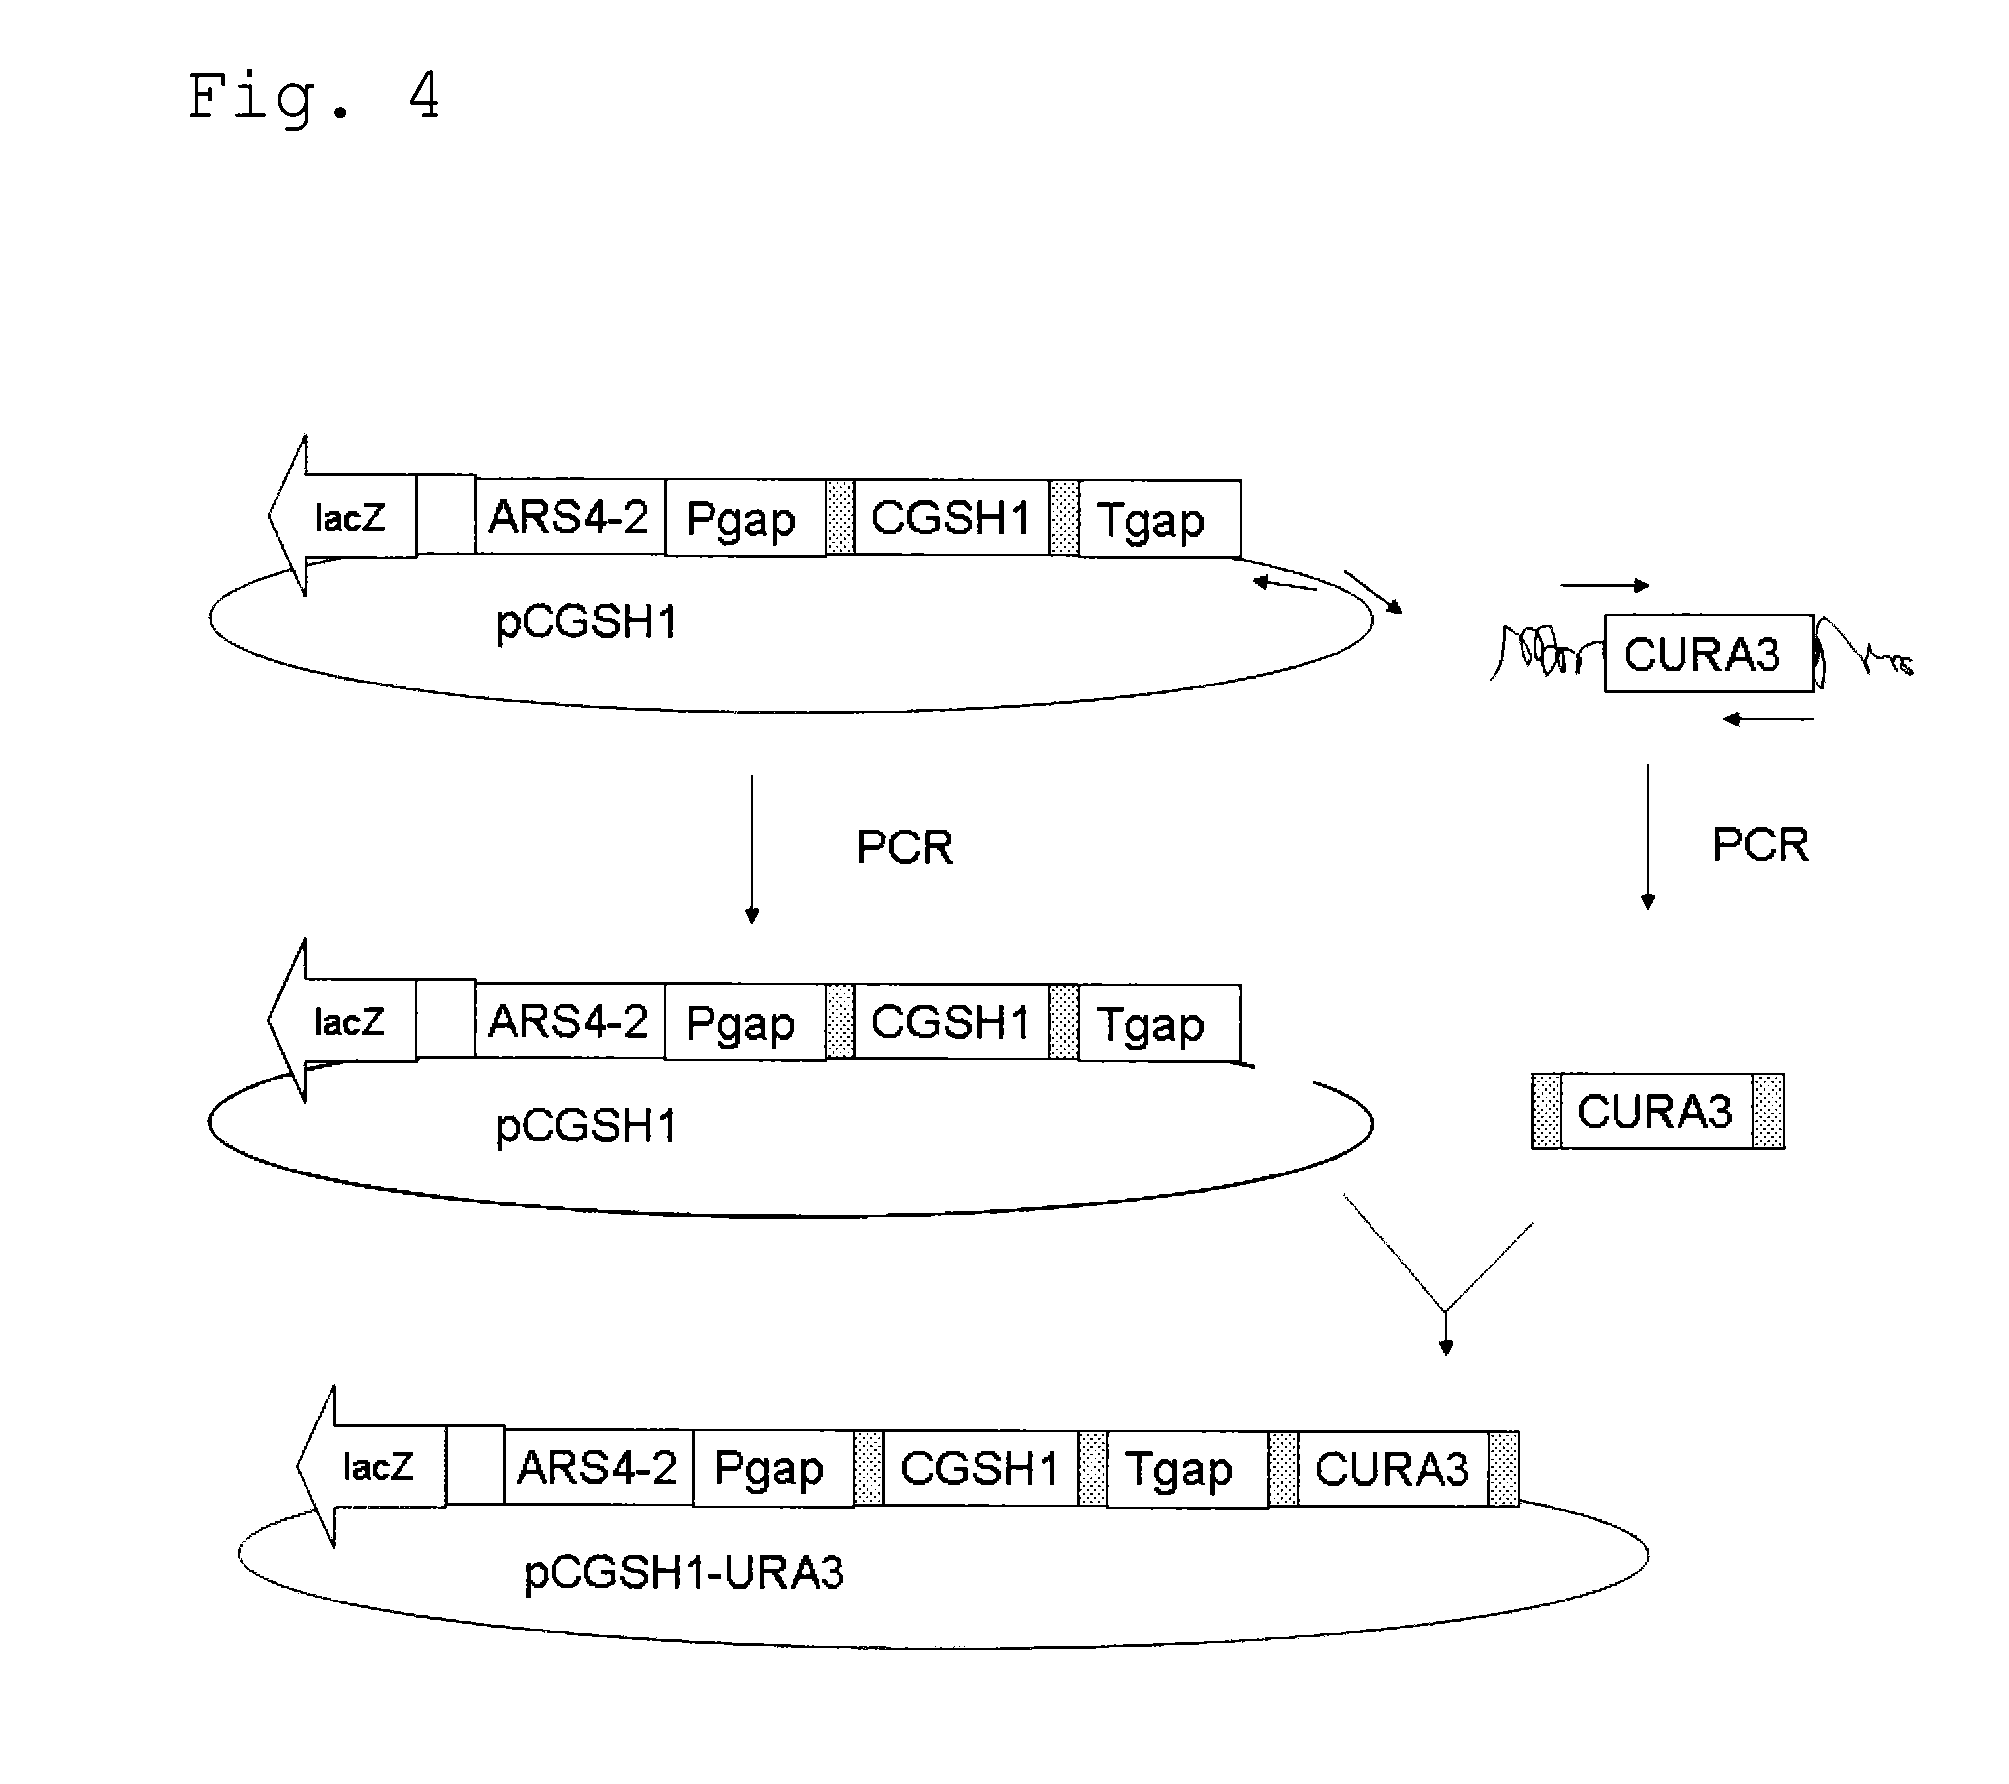 Yeast, yeast extract containing gamma-glu-abu, and a method for producing the same